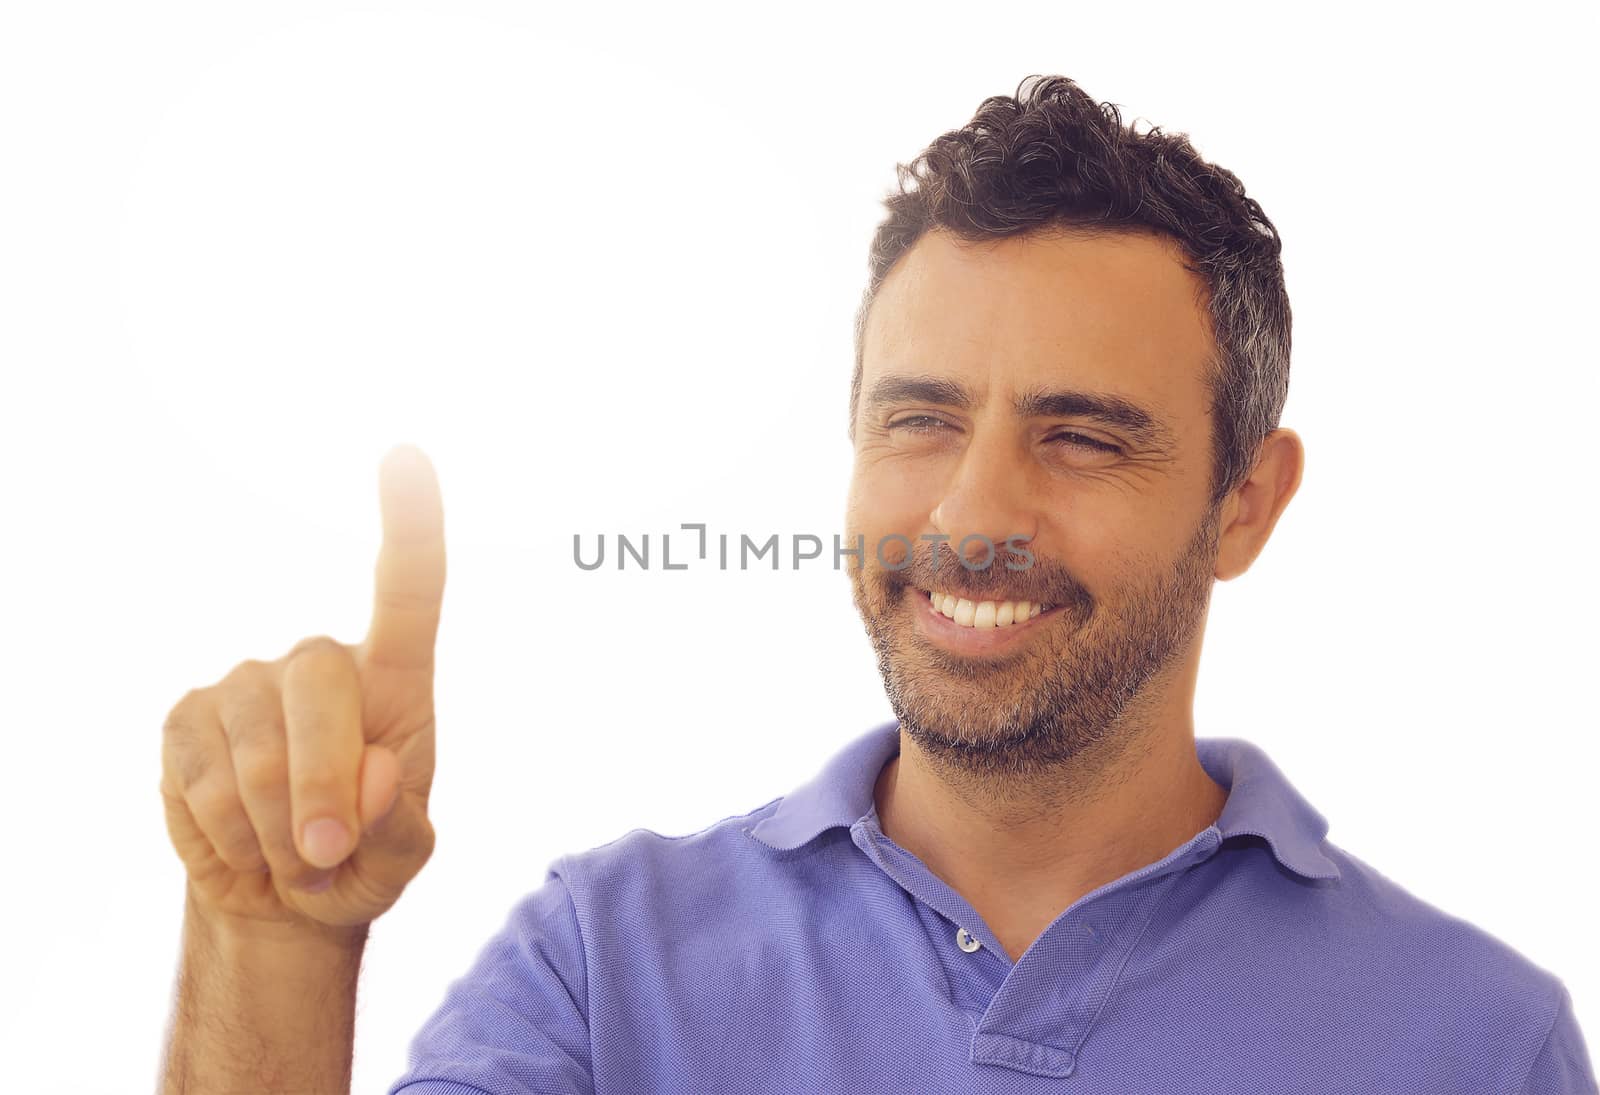 Handsome smiling man activating a touch screen with his finger pointing upwards towards blank copyspace in a communication and advertising concept, on white